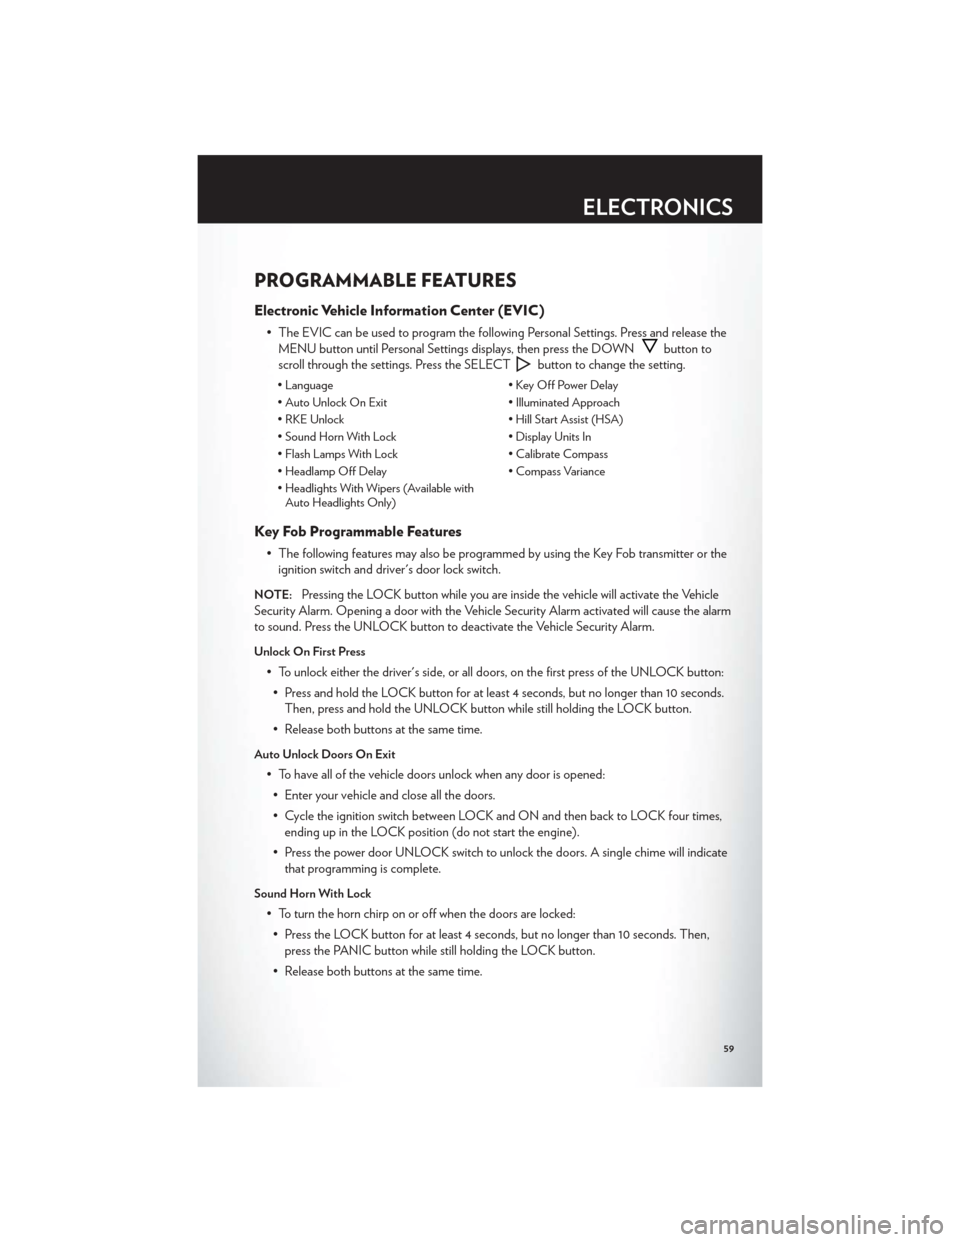 CHRYSLER 200 2012 1.G User Guide PROGRAMMABLE FEATURES
Electronic Vehicle Information Center (EVIC)
• The EVIC can be used to program the following Personal Settings. Press and release theMENU button until Personal Settings display